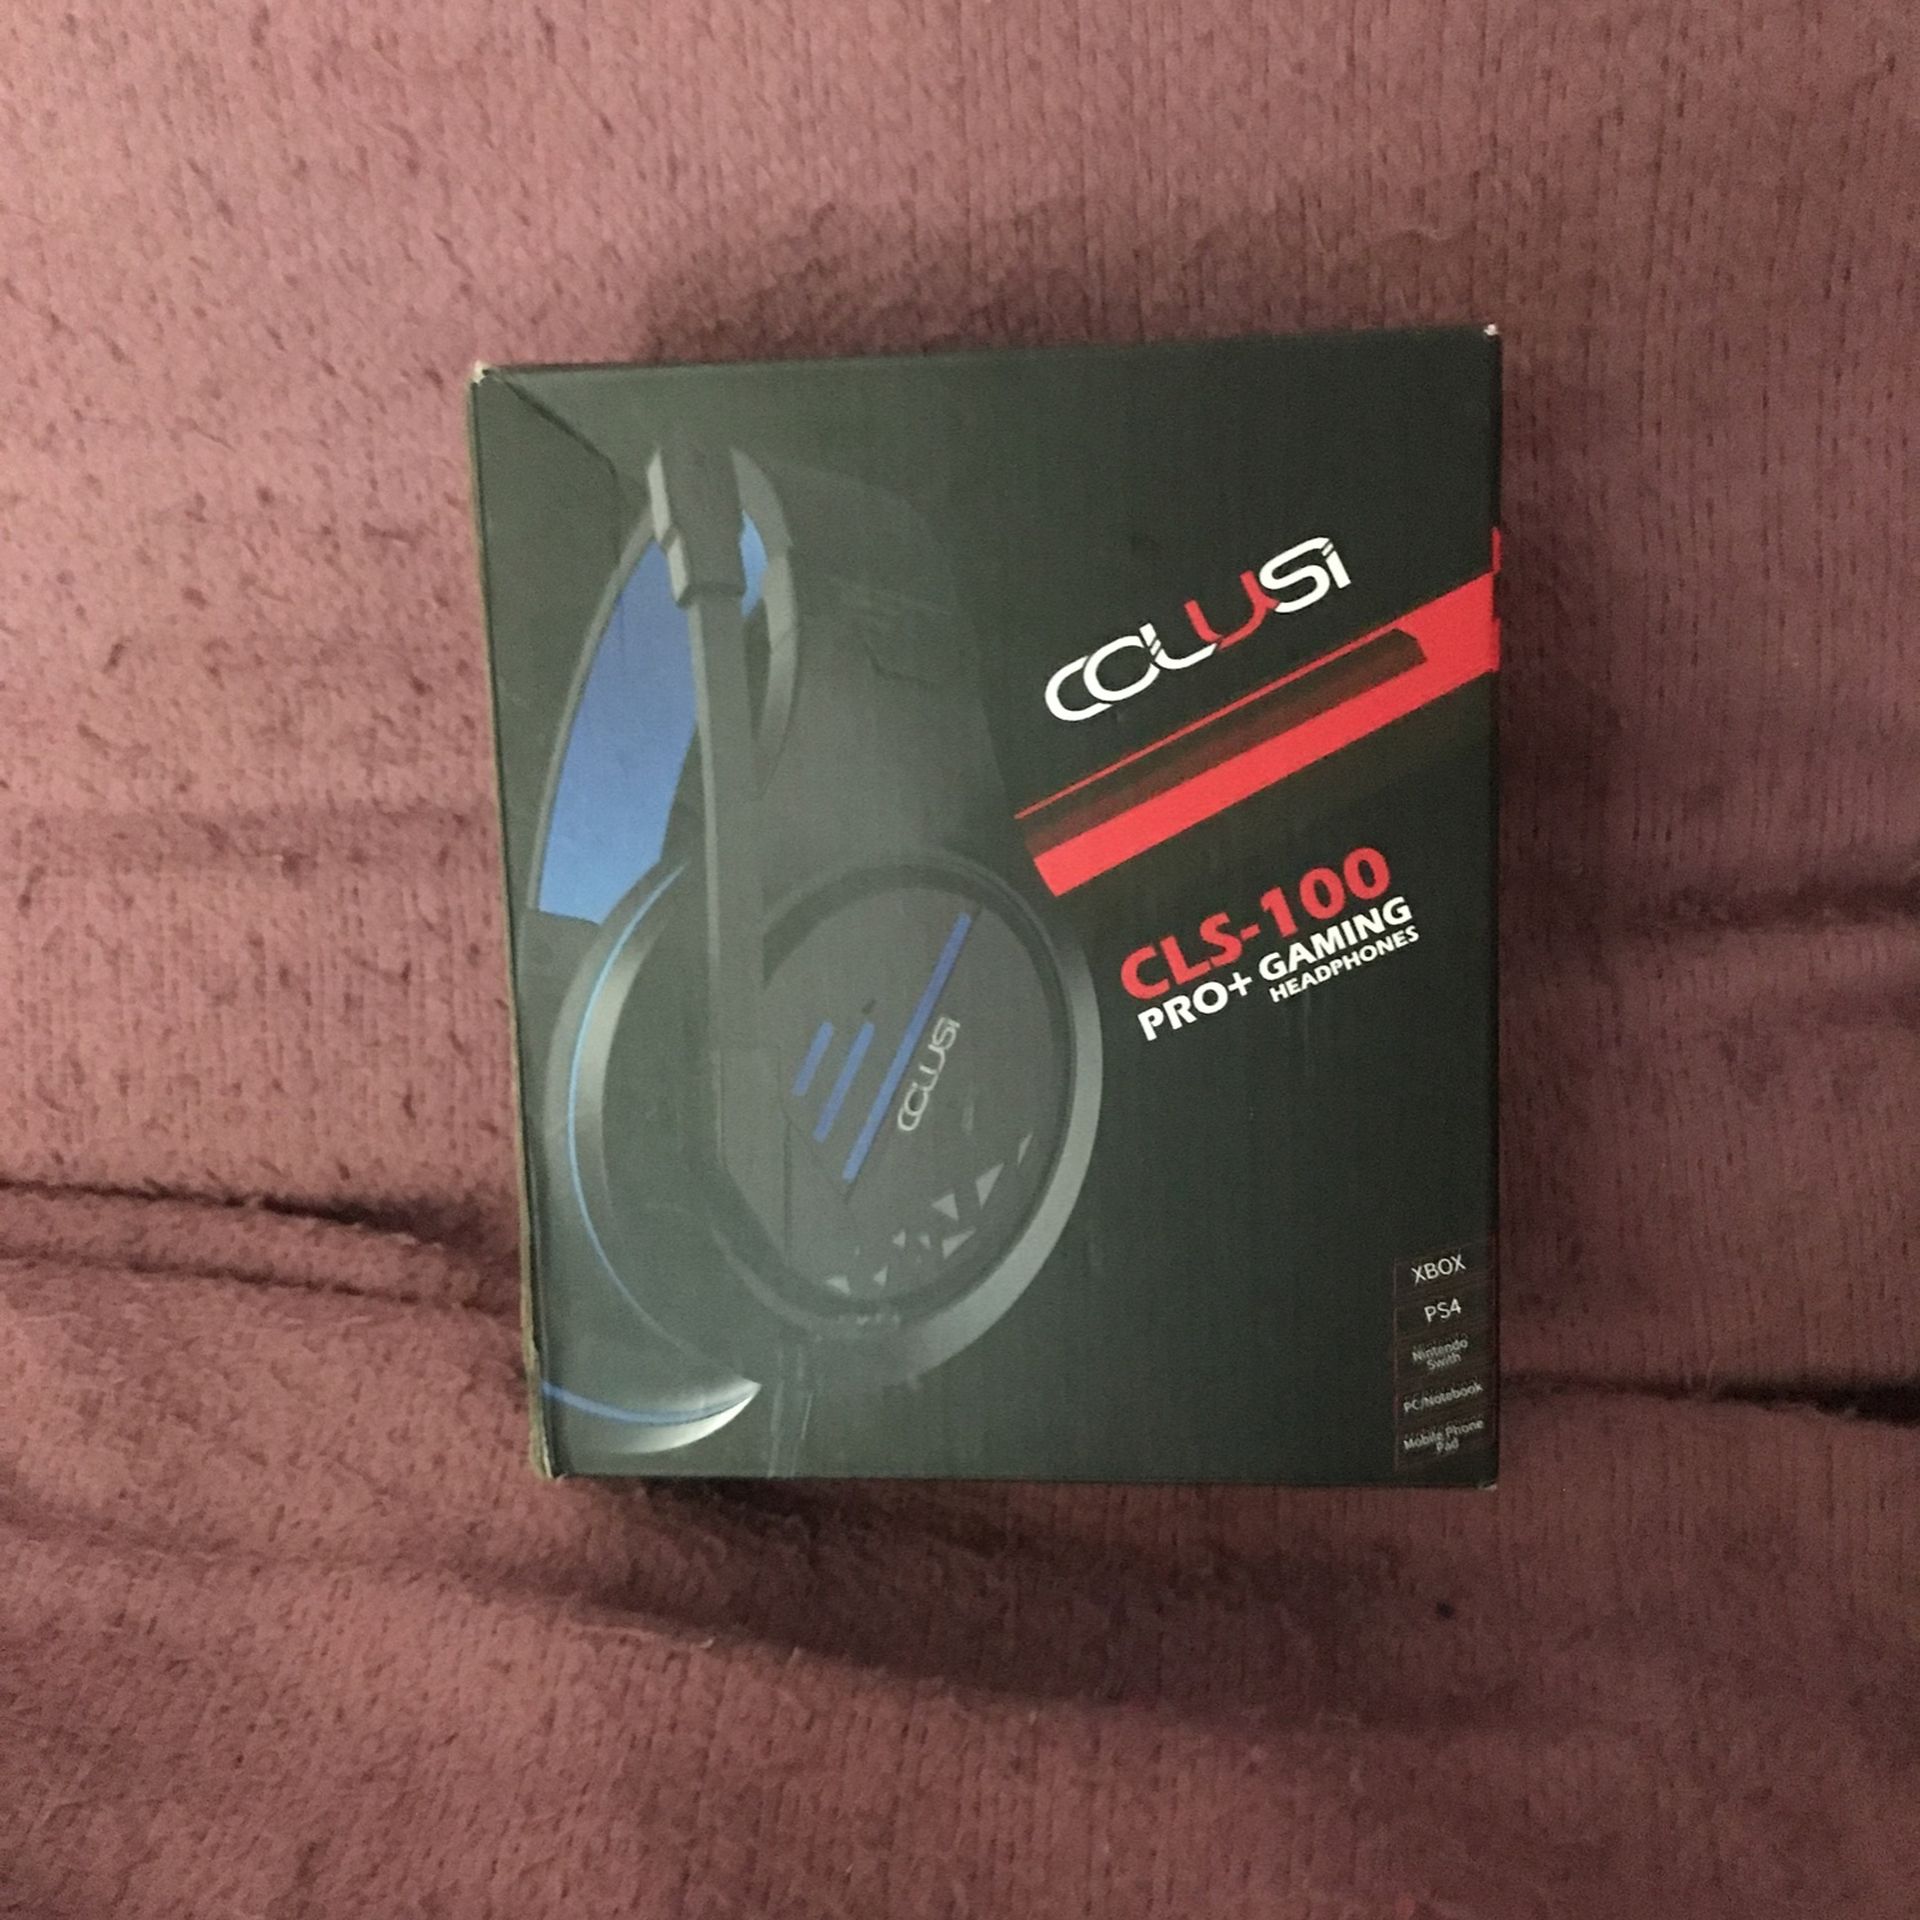 Gaming Headphones With Mic